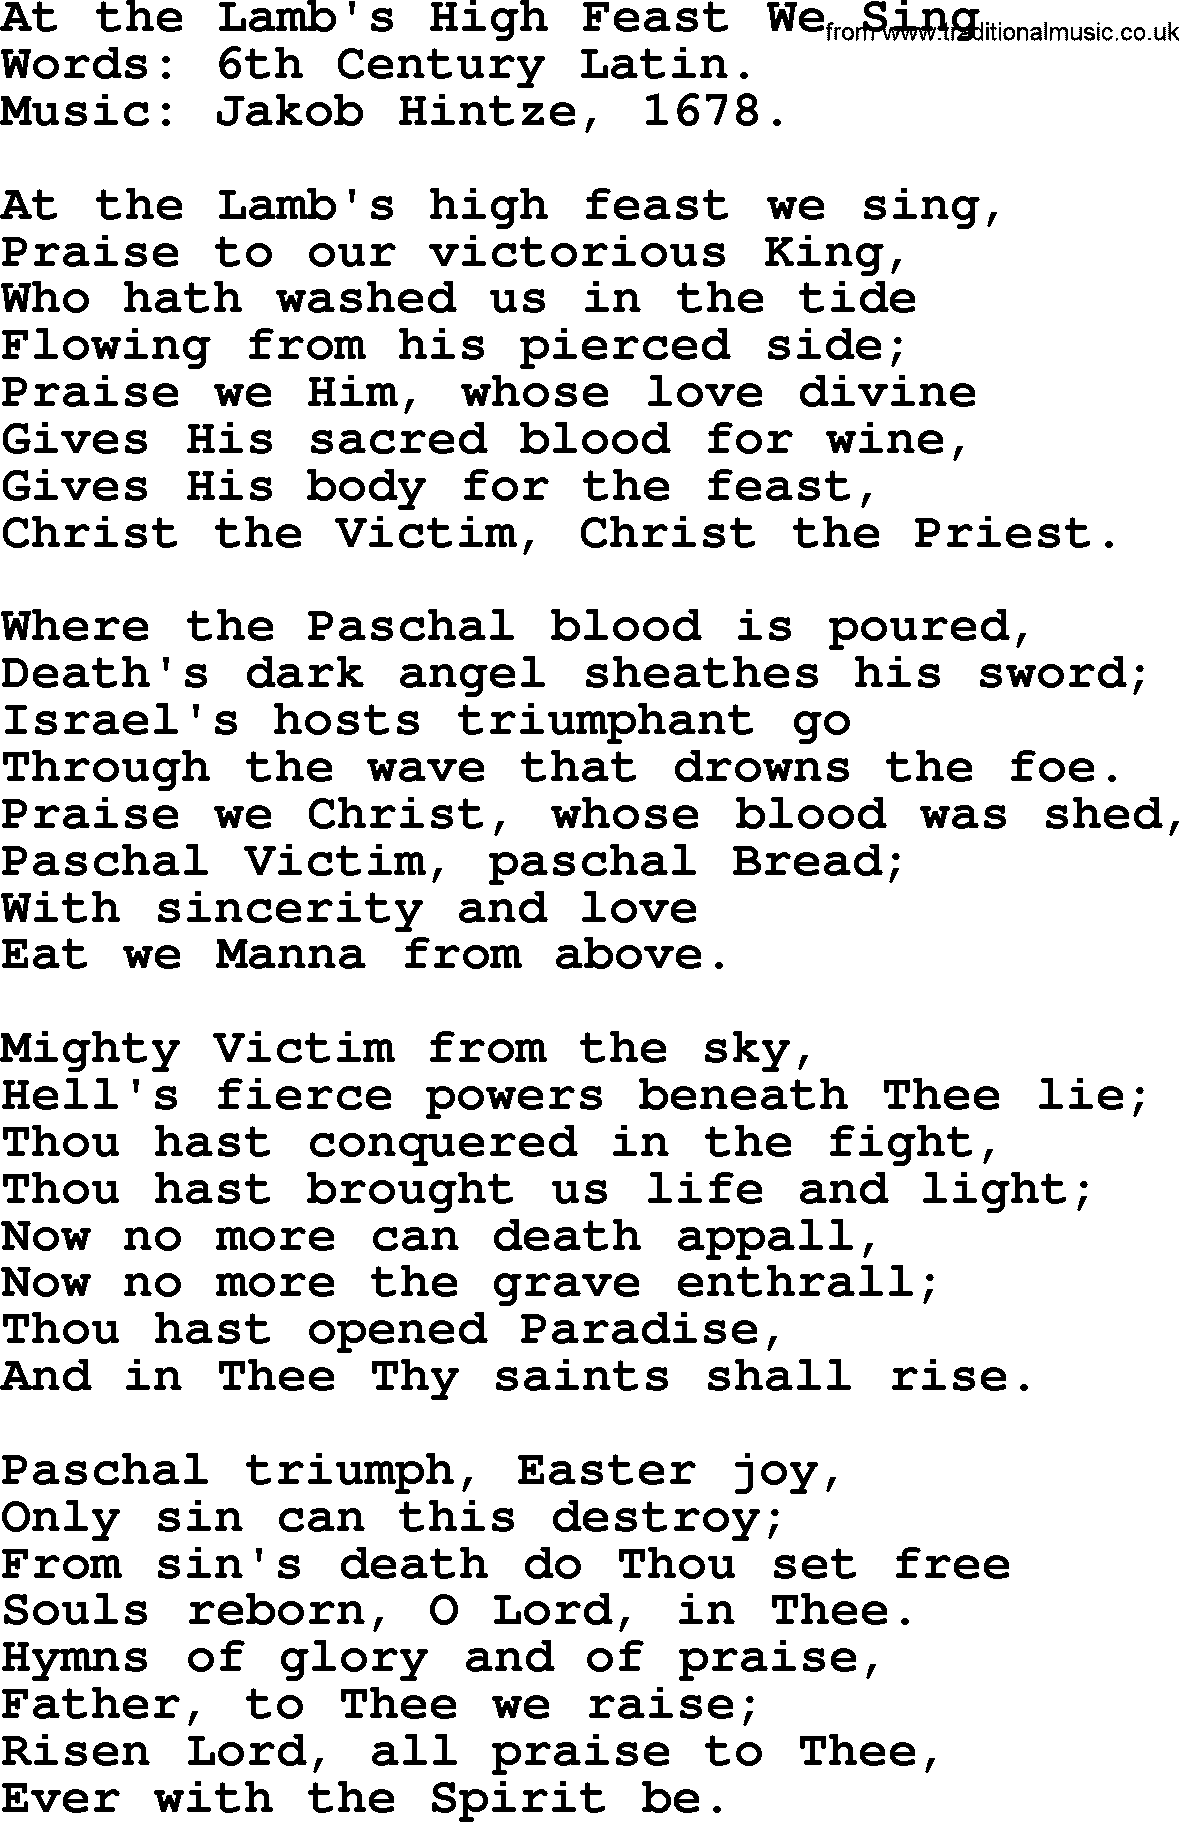 Hymns about Angels, Hymn: At The Lamb's High Feast We Sing.txt lyrics with PDF